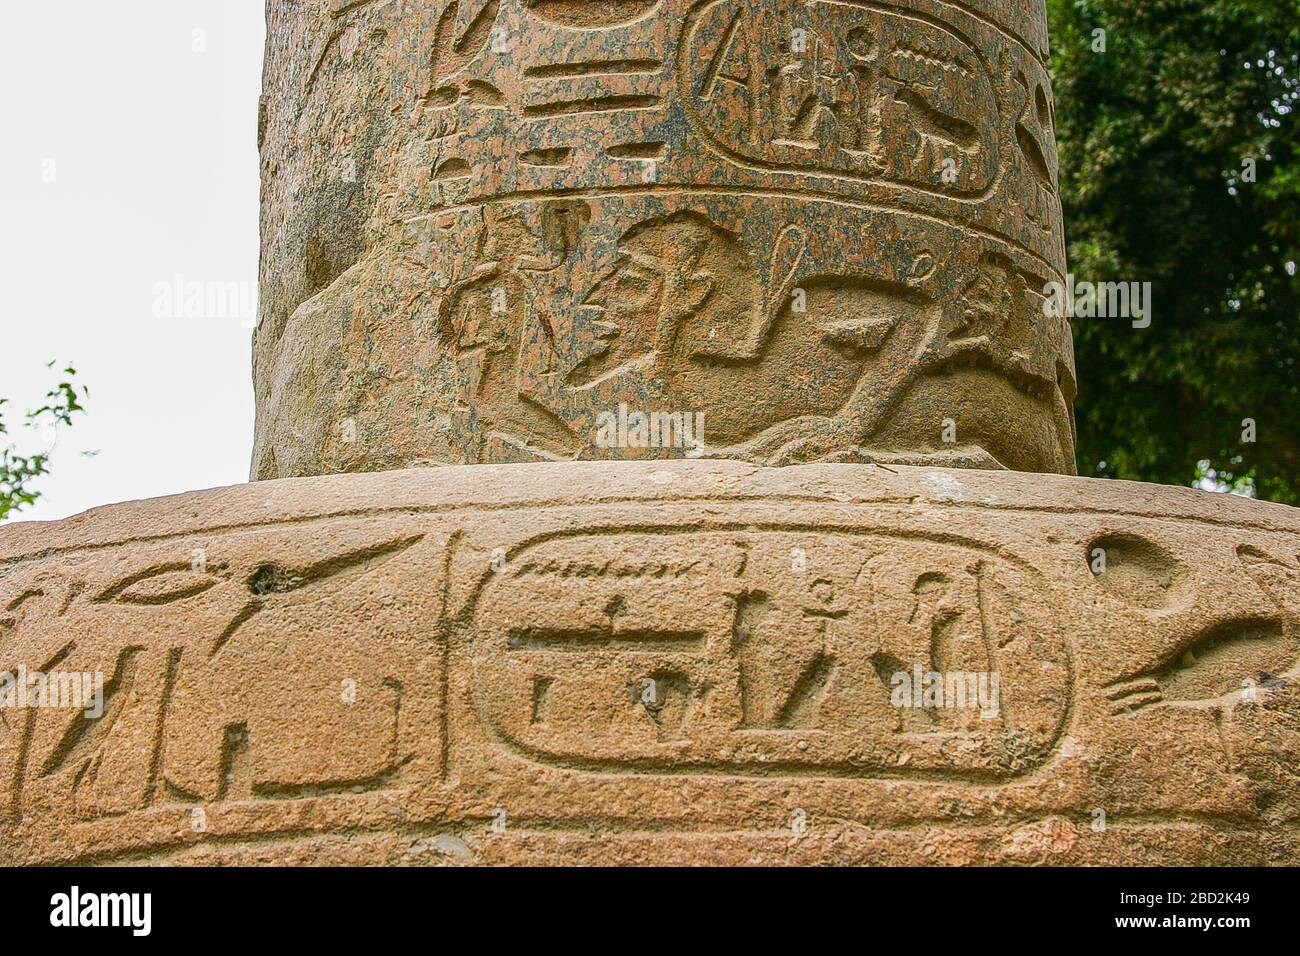 Egypt, Cairo, Heliopolis, the memorial column of the king Merenptah. Photo taken in 2007, before the column was dismantled. The plinth is in quartzite. Stock Photo